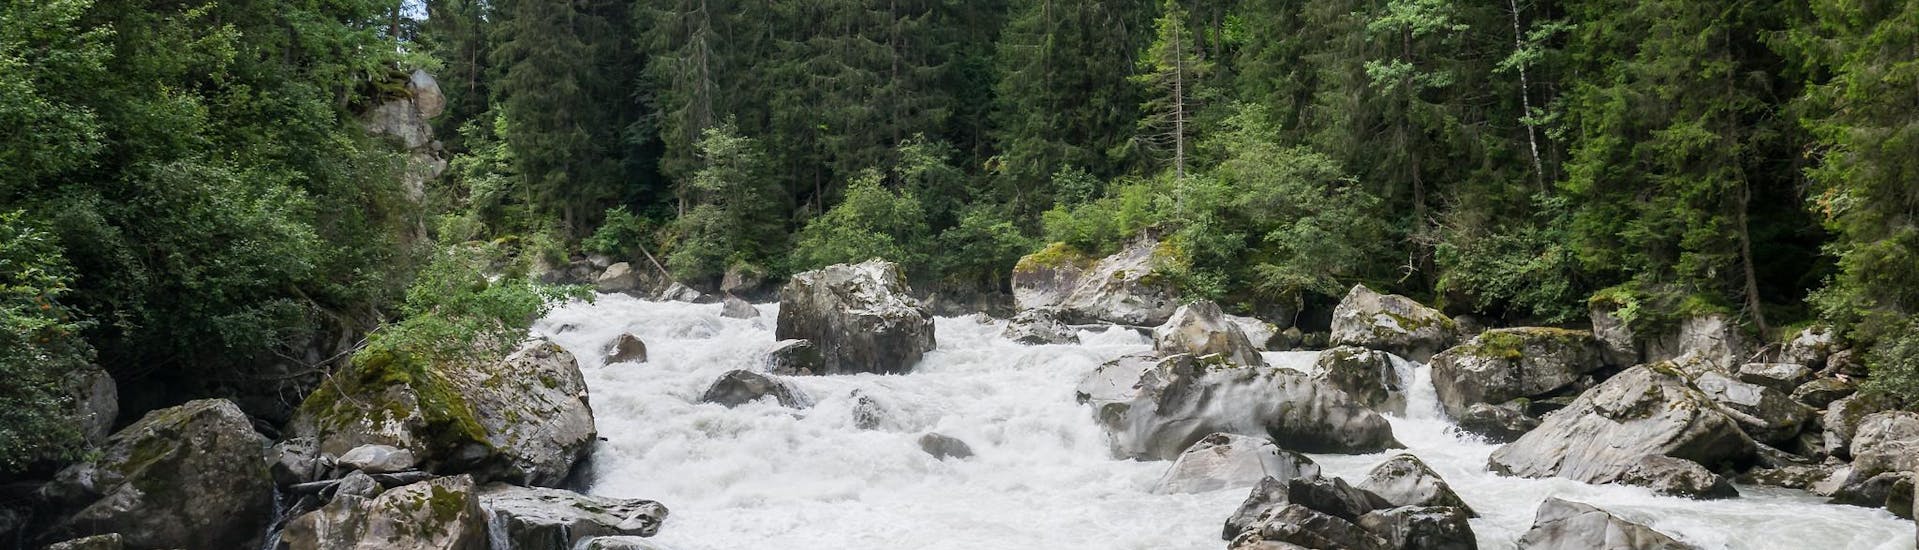 River in Otztal area during a rafting activity in Austria.